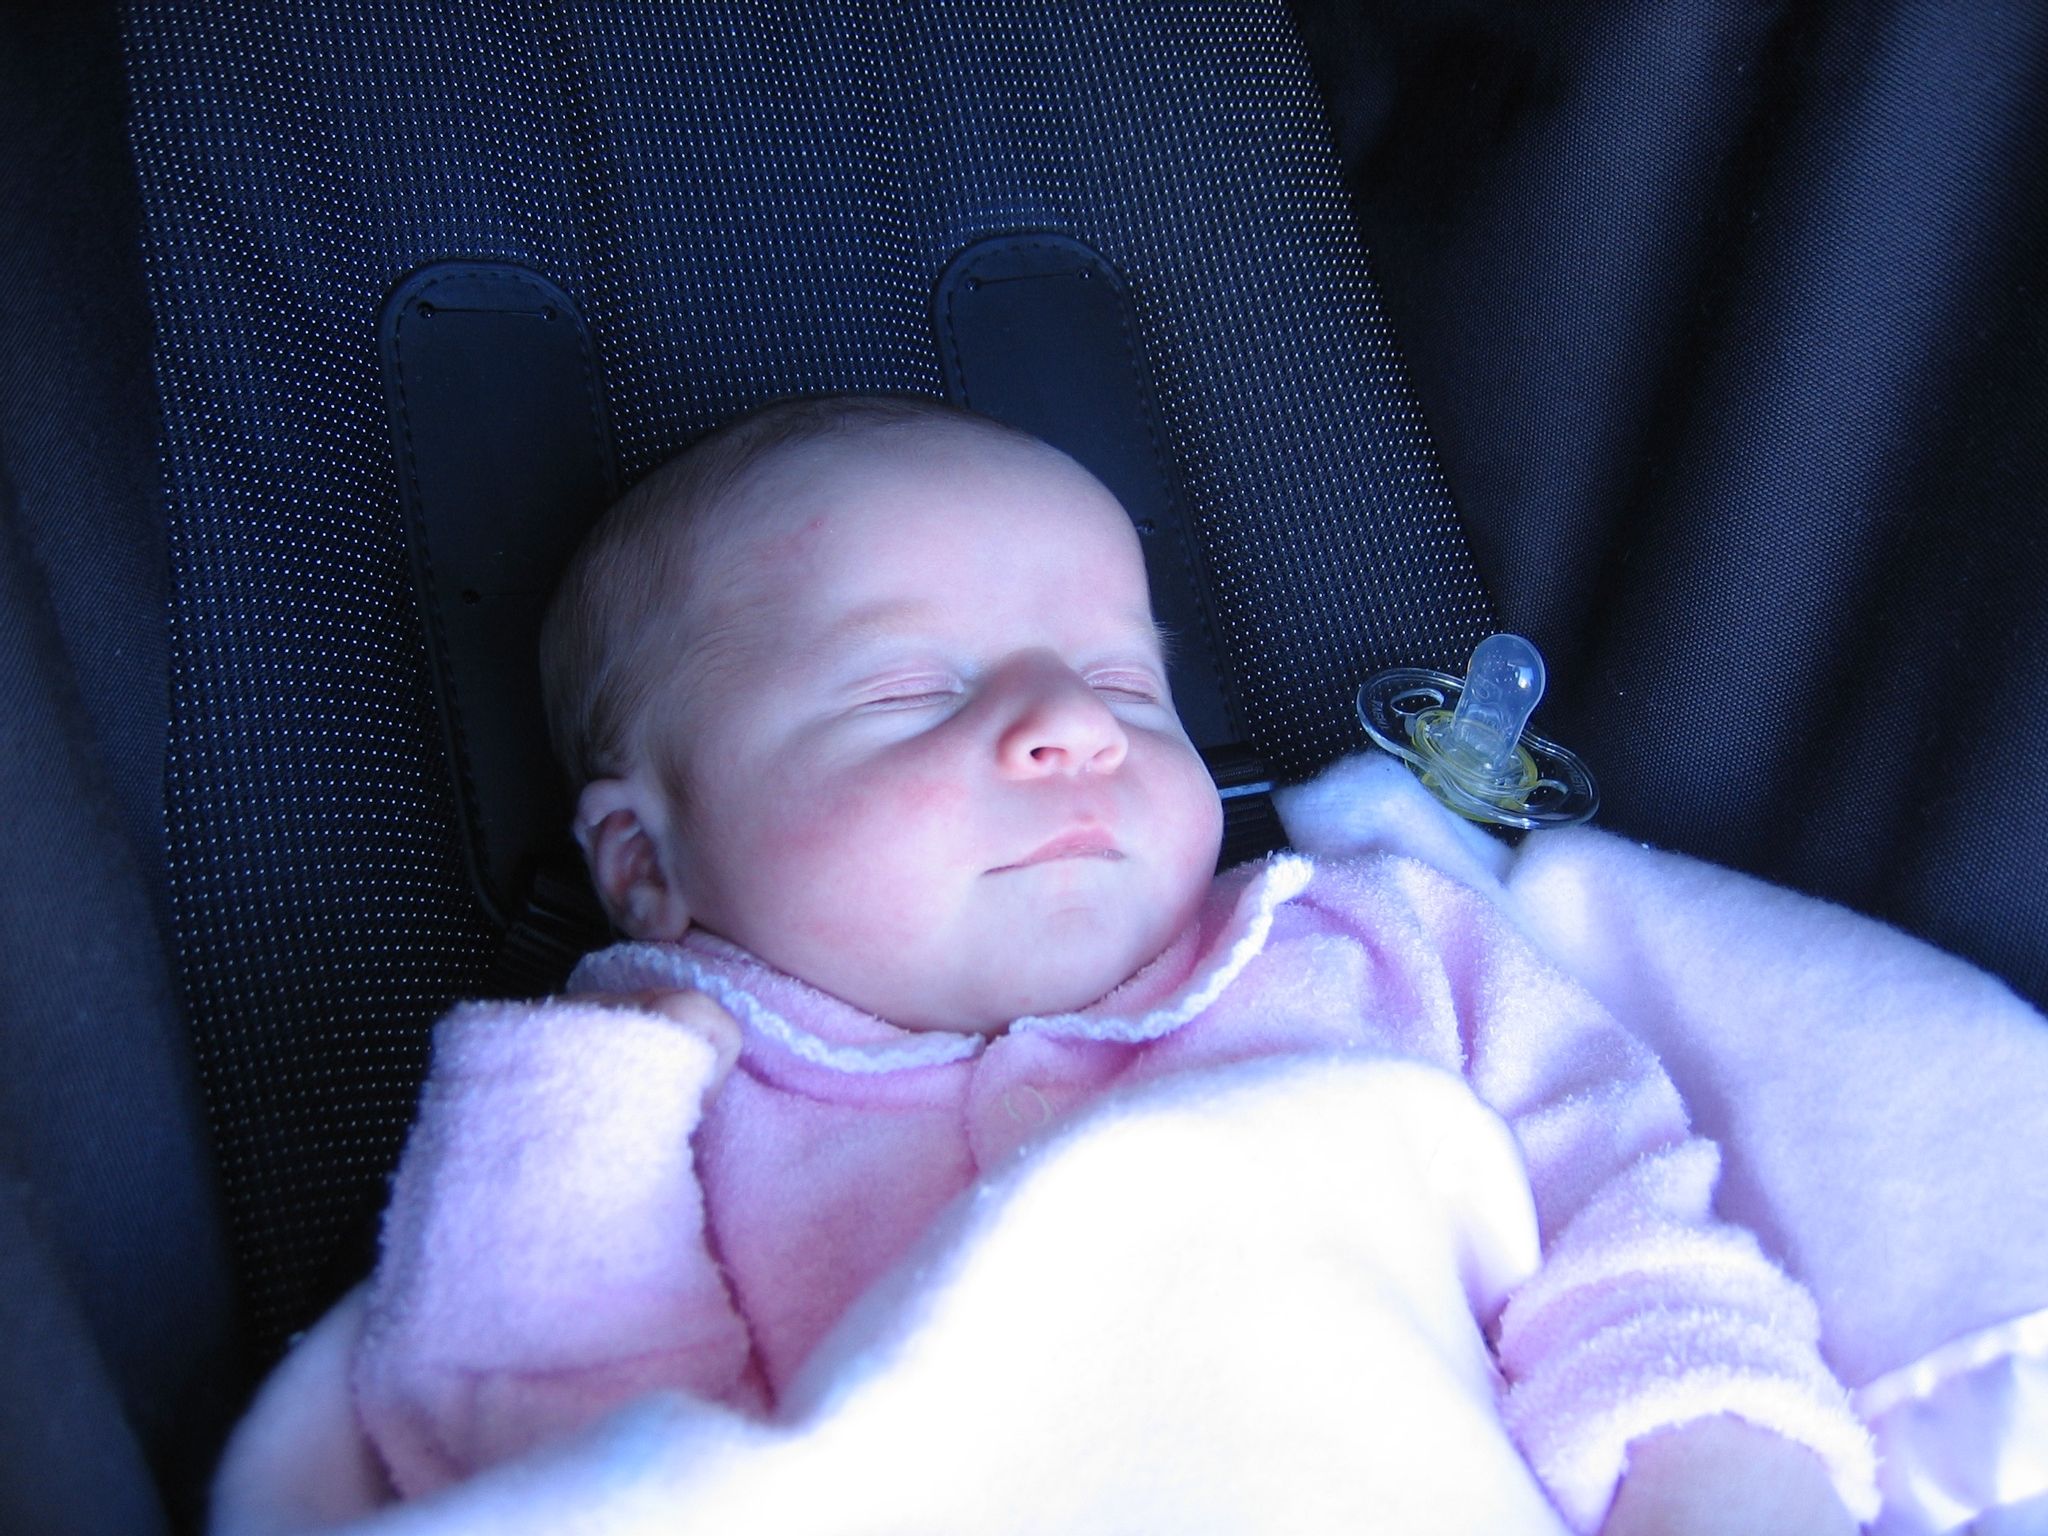 A photo of a newborn baby all clothed and wrapped up in pink, lying asleep in a stroller.